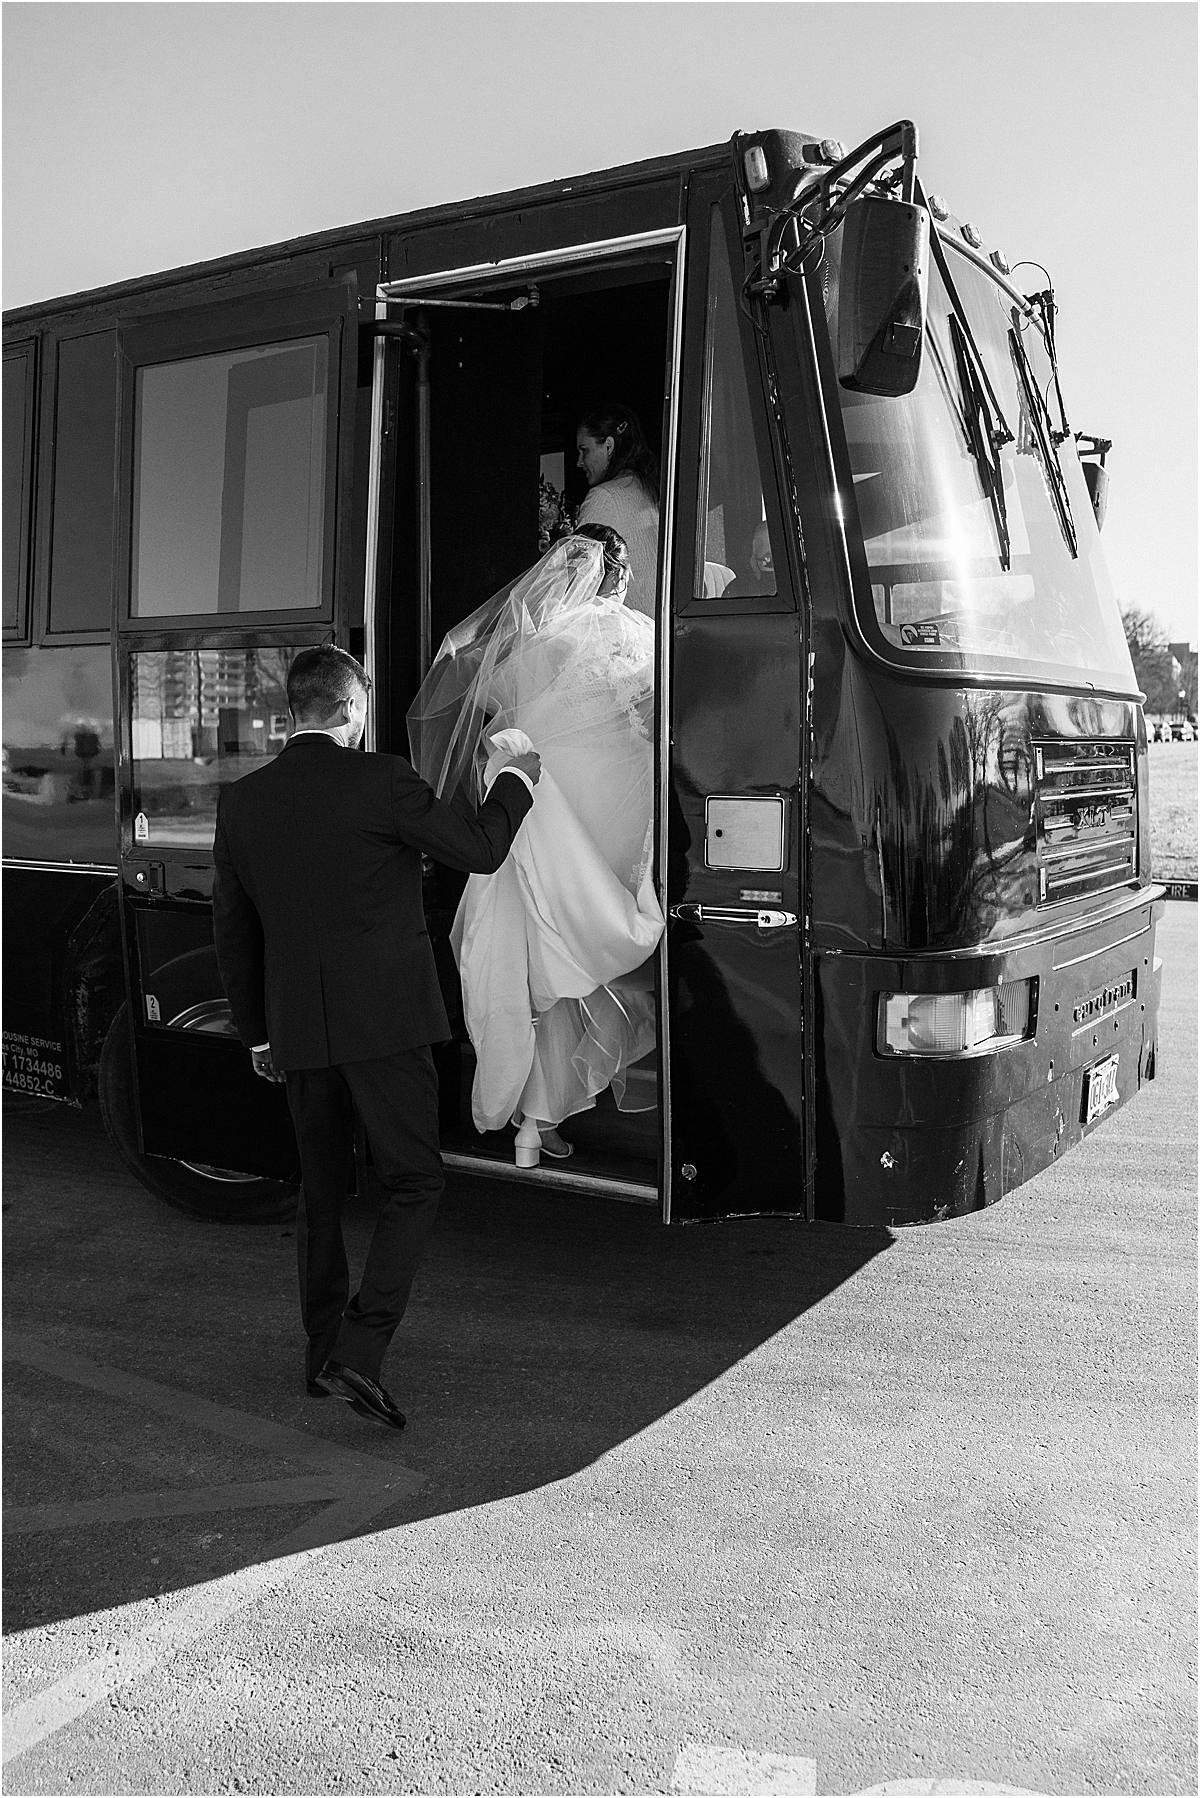 Wedding transportation at Magnolia Venue and Urban Garden by Kansas City Photographer West Rose Photo and Film